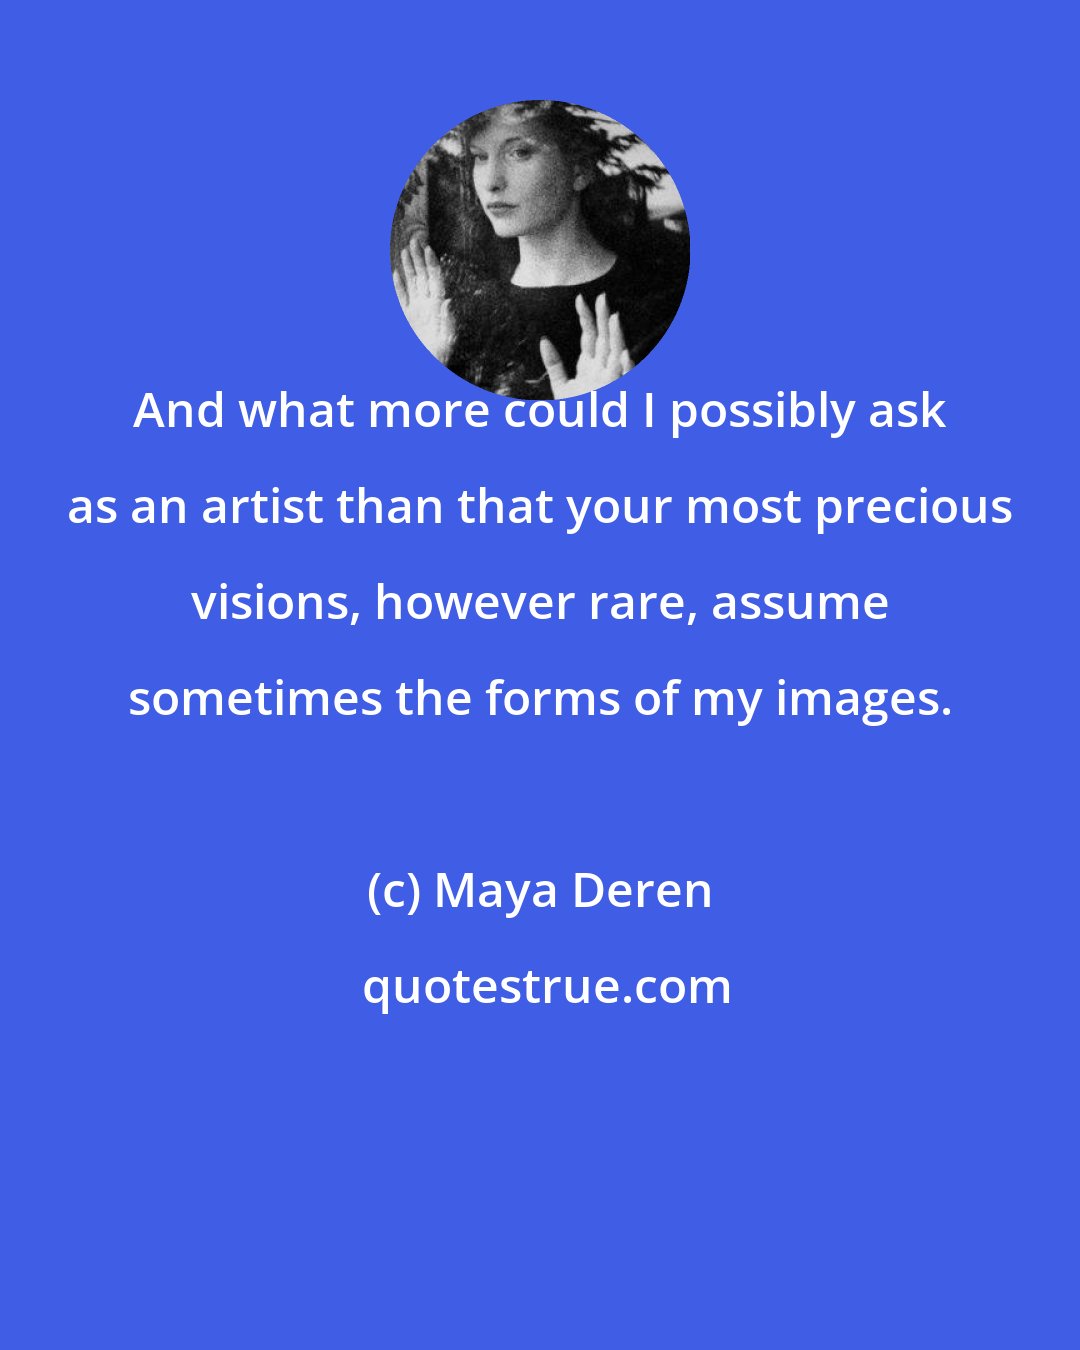 Maya Deren: And what more could I possibly ask as an artist than that your most precious visions, however rare, assume sometimes the forms of my images.